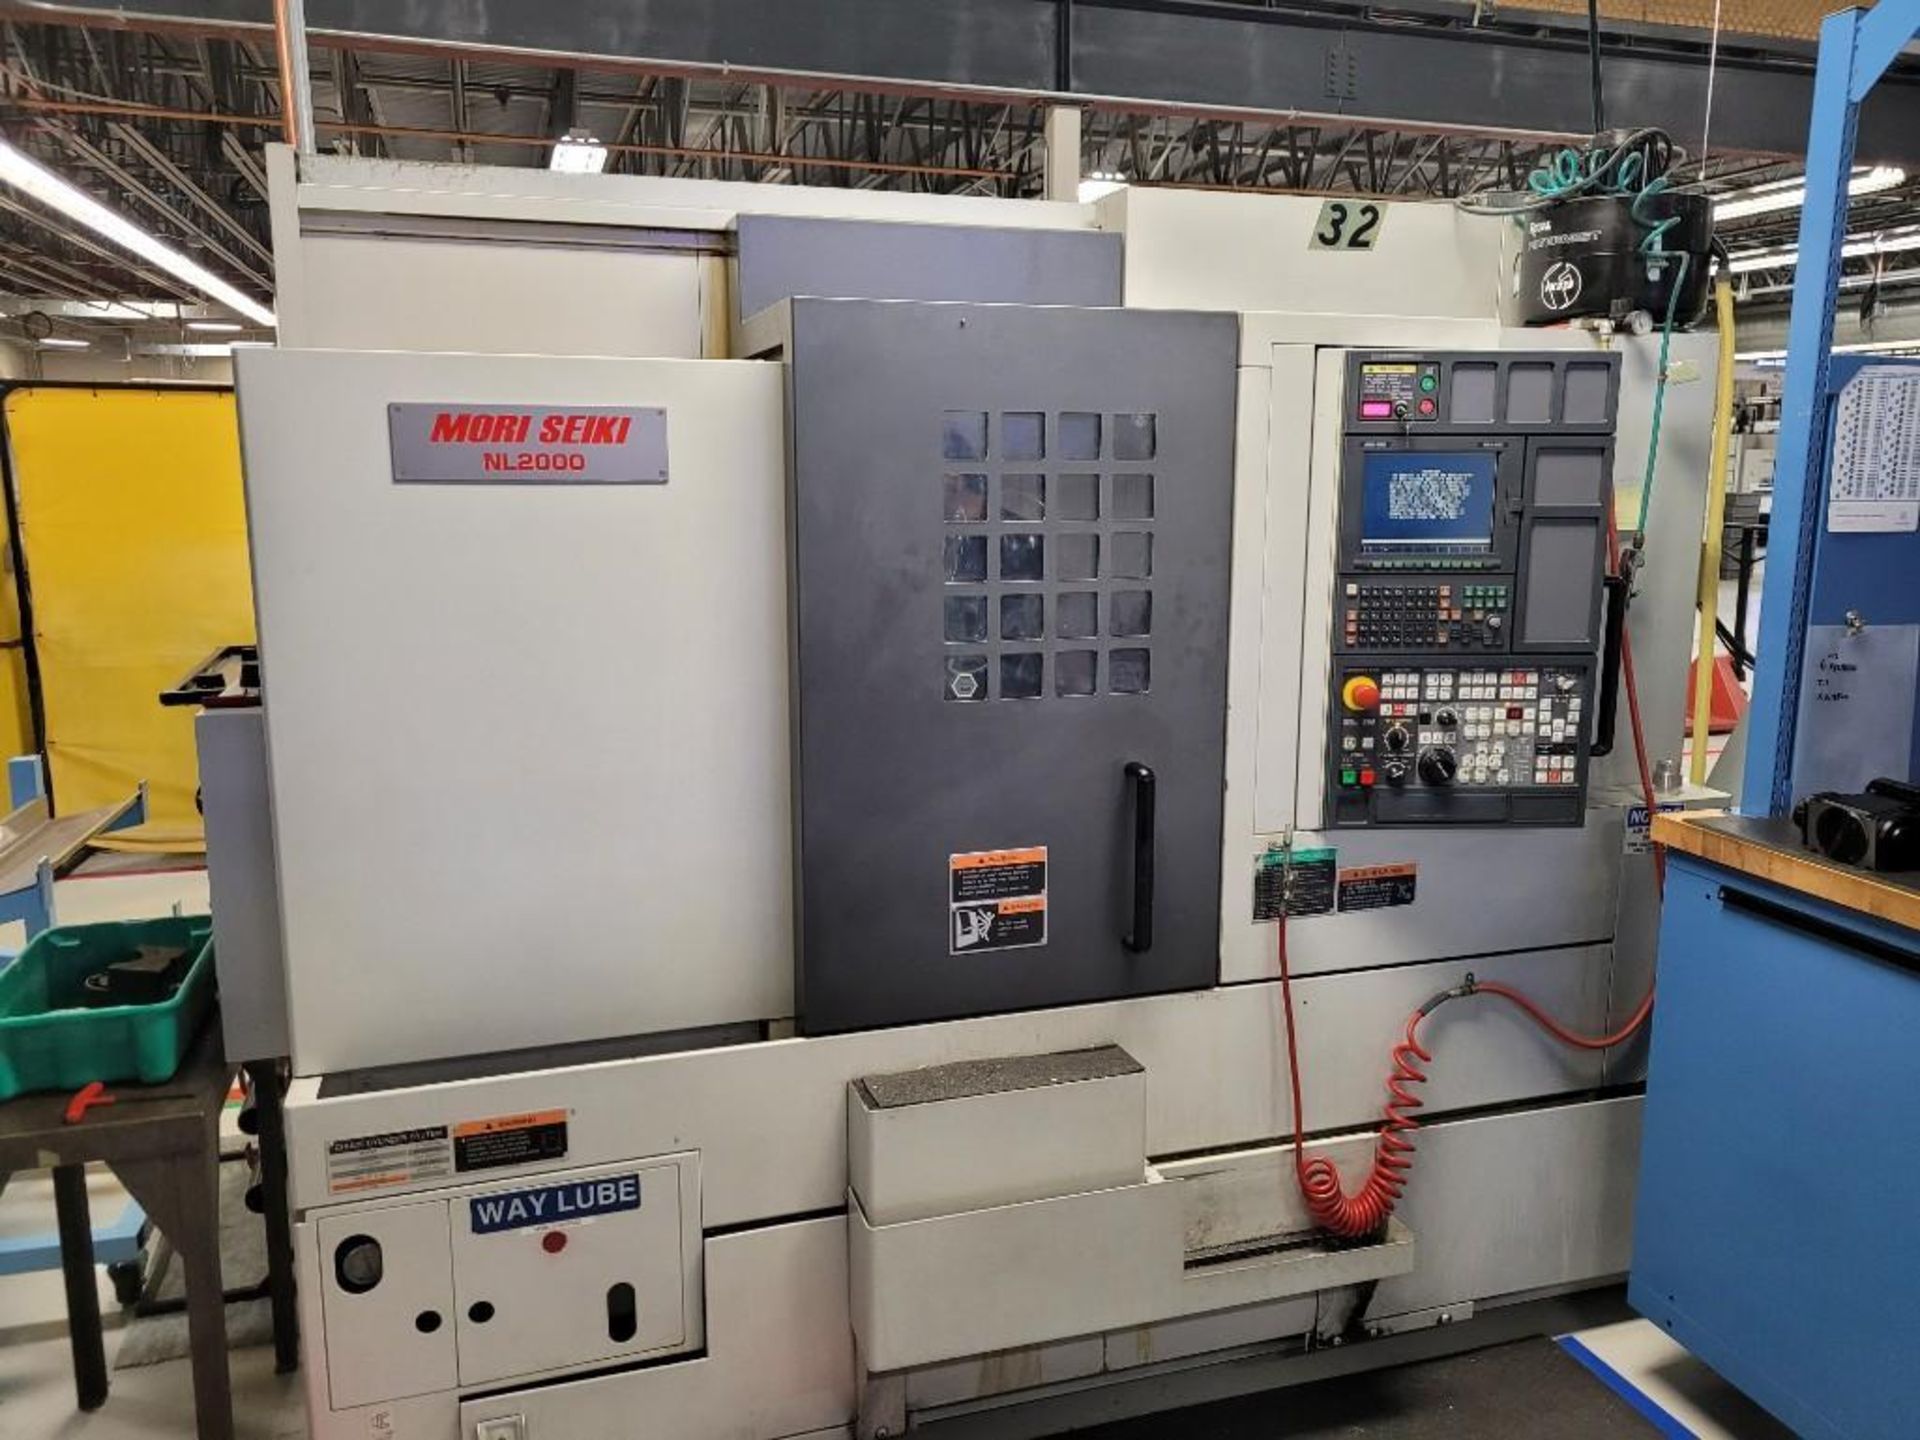 Mori Seiki NL2000Y CNC Turning Center, MSX-850 Control, Y-Axis, Collet Chuck, New 2005 - Image 2 of 14